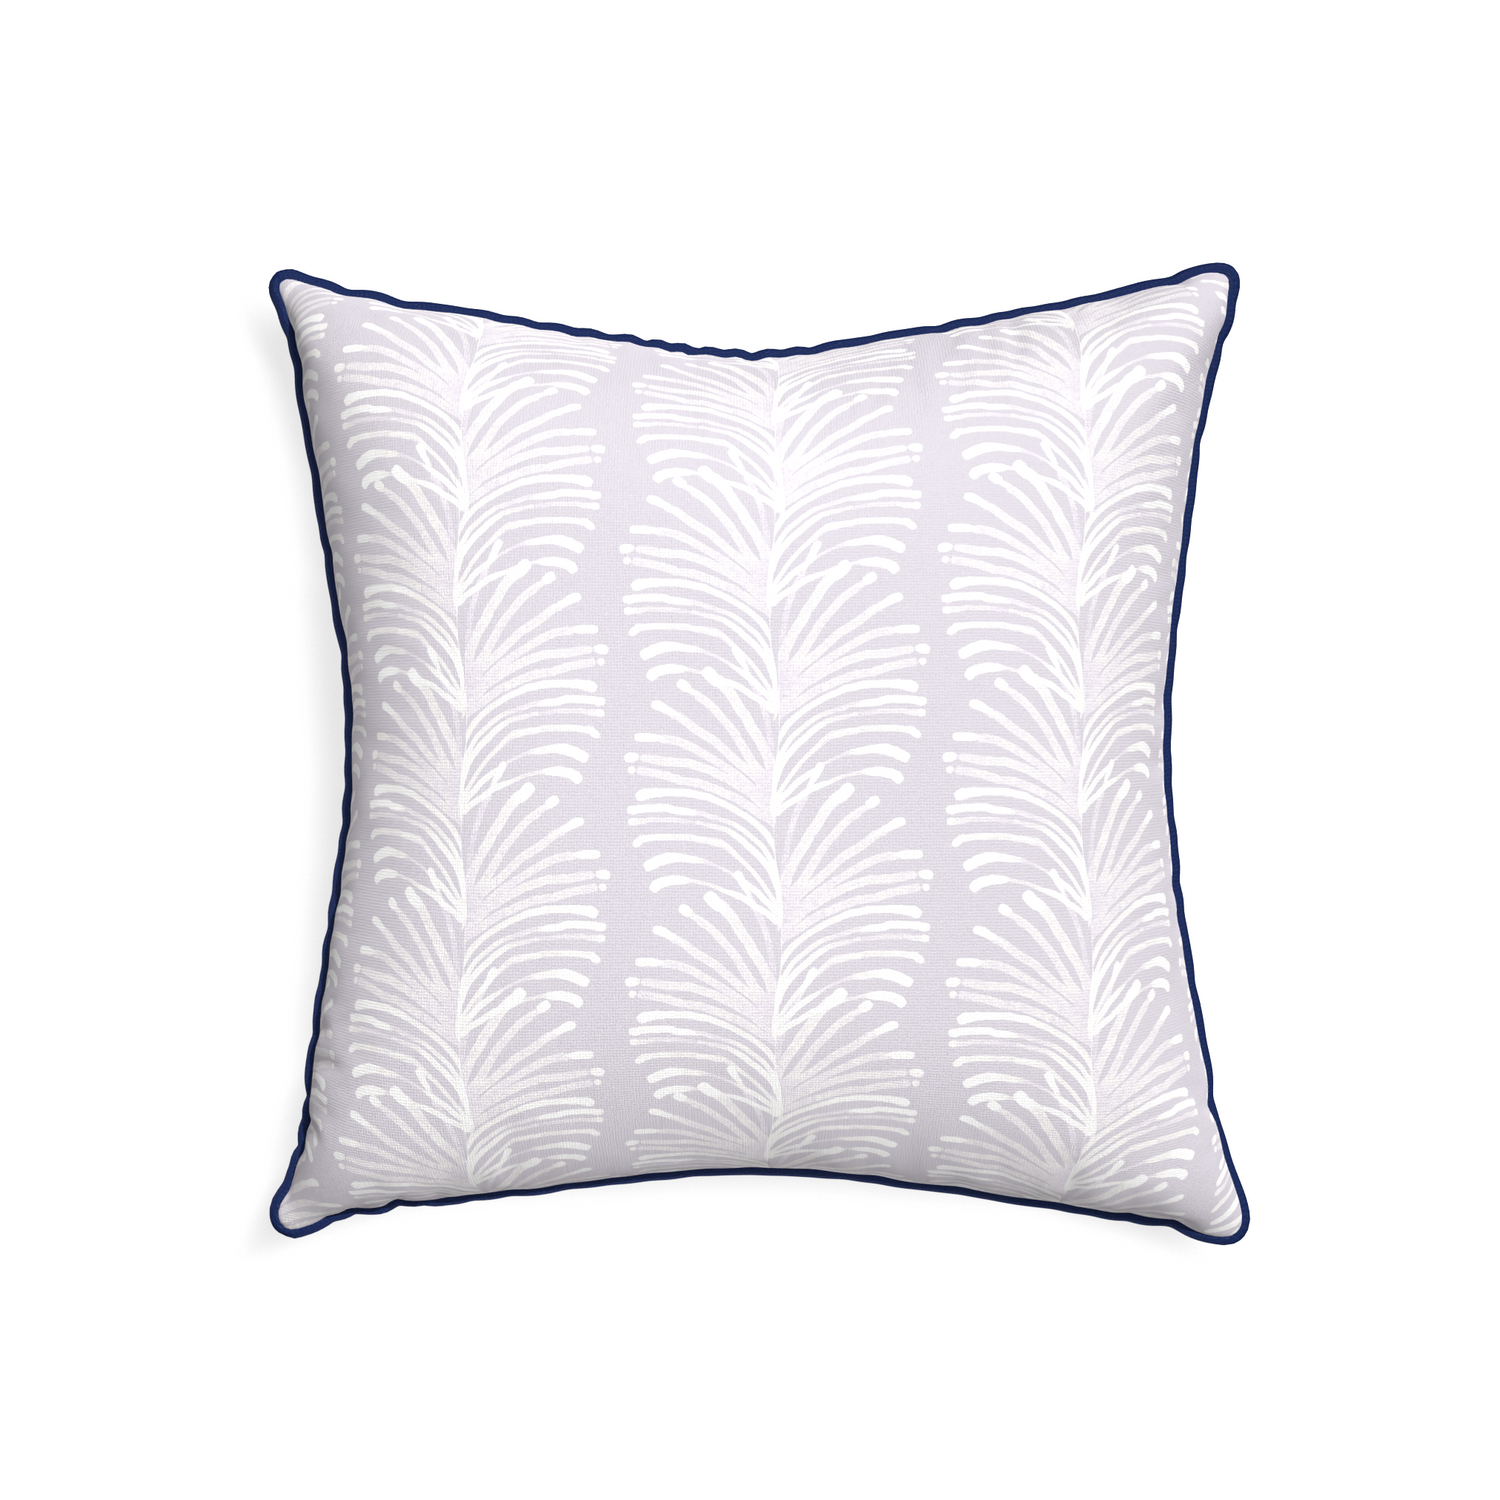 22-square emma lavender custom pillow with midnight piping on white background